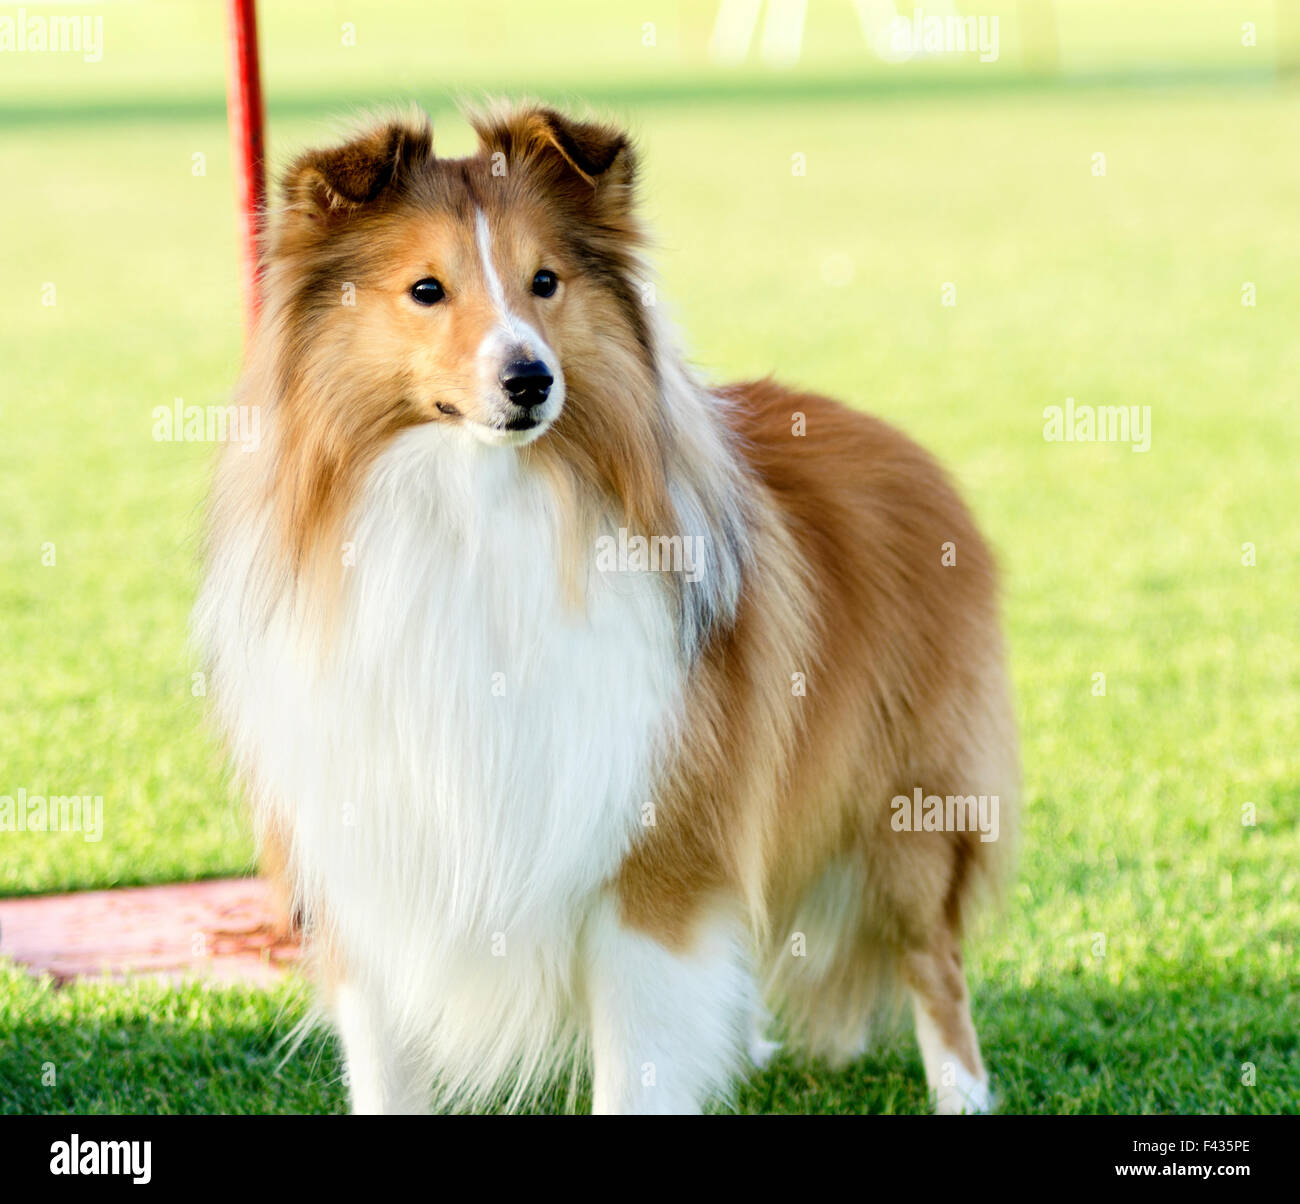 A young, beautiful, white and sable Shetland Sheepdog standing on the lawn looking happy and playful. Shetland Sheepdogs look li Stock Photo